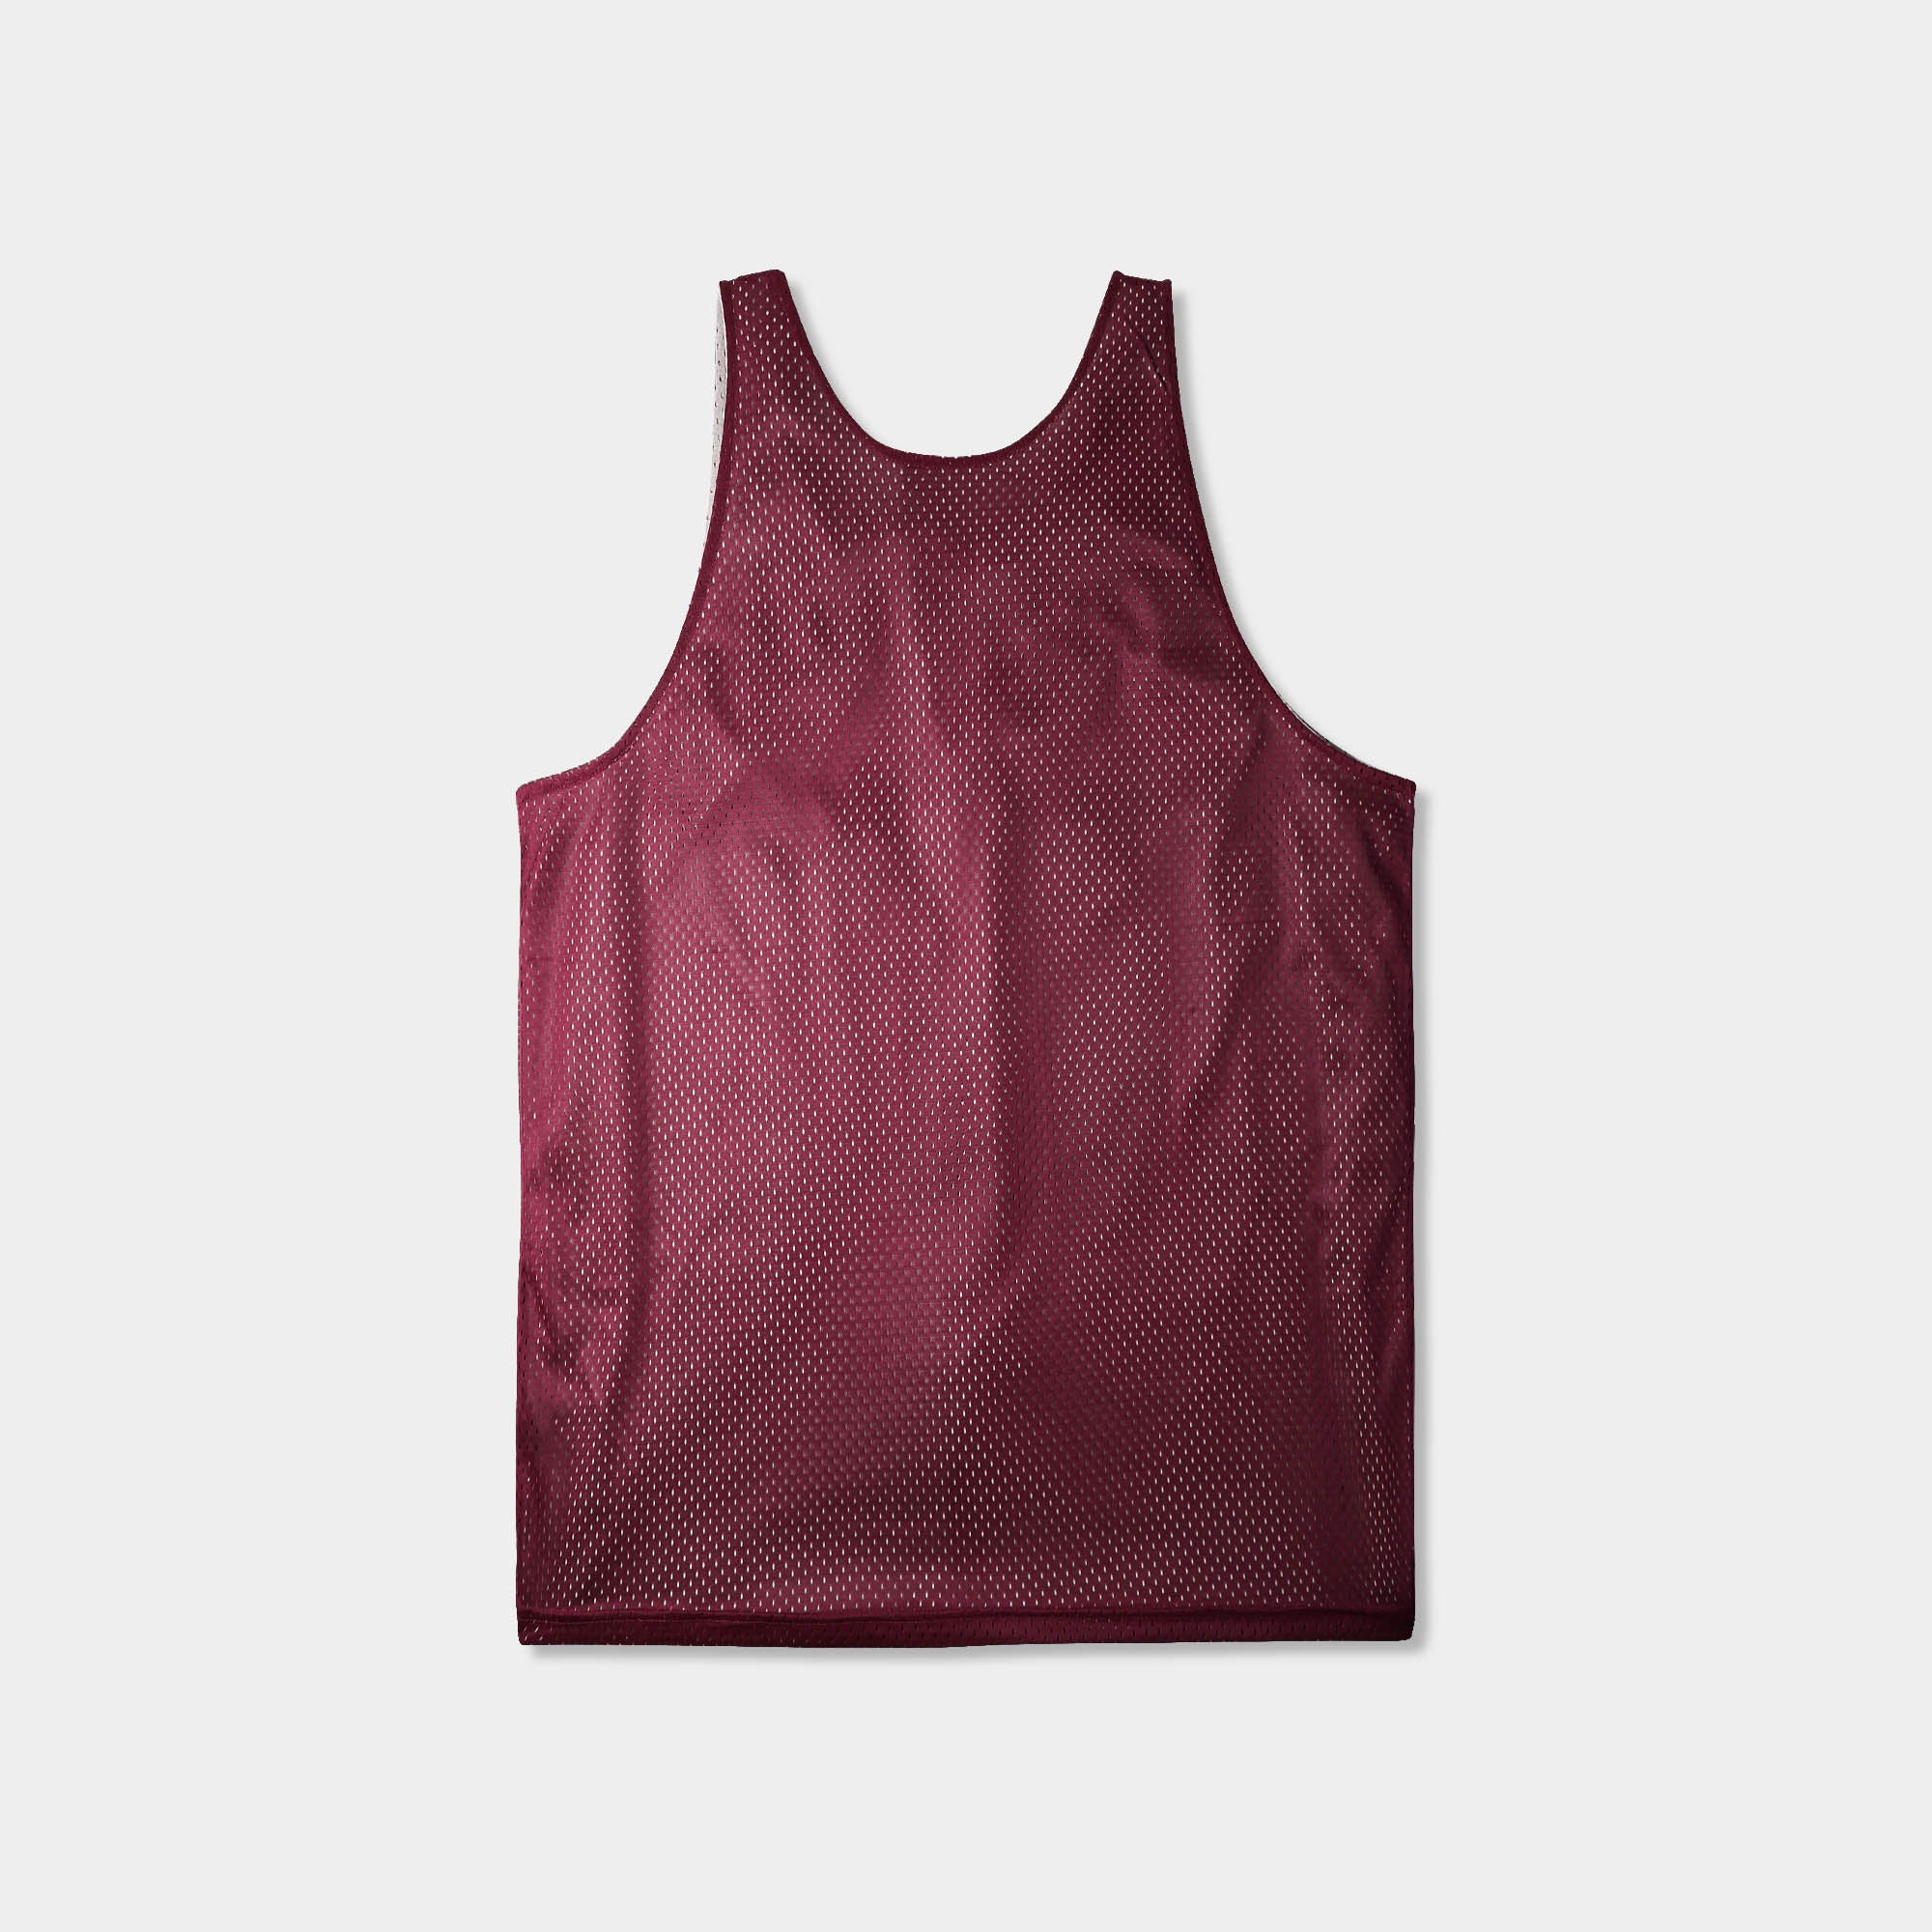 Red Blood Deep Ink Classic Basketball Jersey, Mesh Fabric Tank Top, L